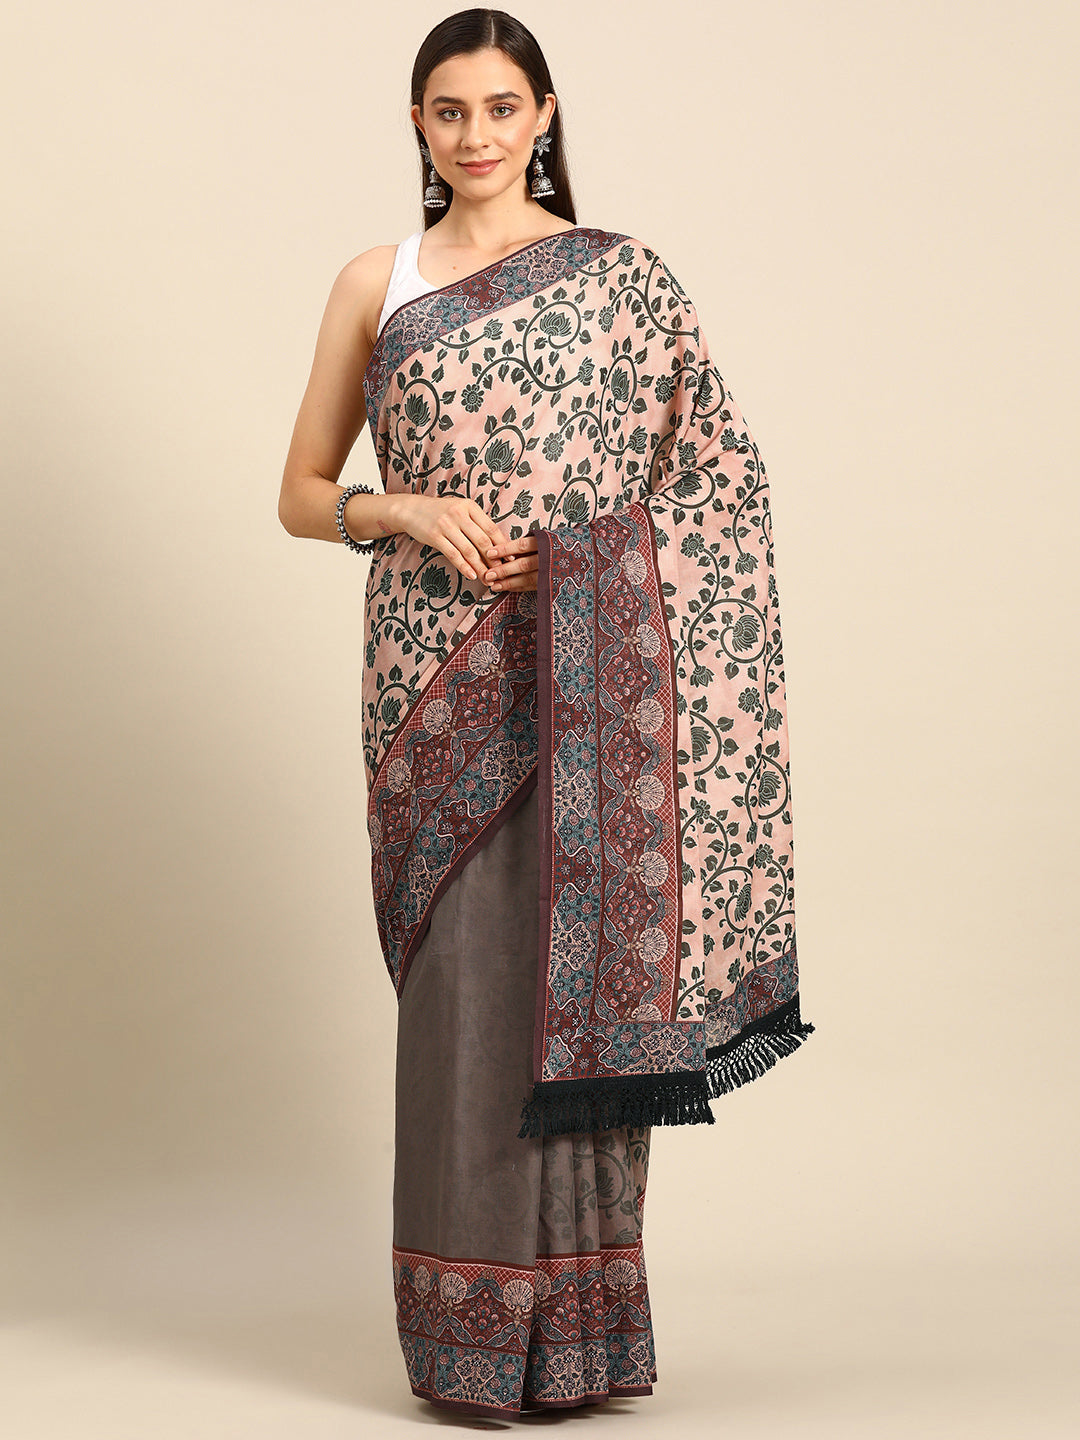 Buta Buti Peach Colour Floral Printed Pure Cotton Saree With Unstitched Blouse And Lace